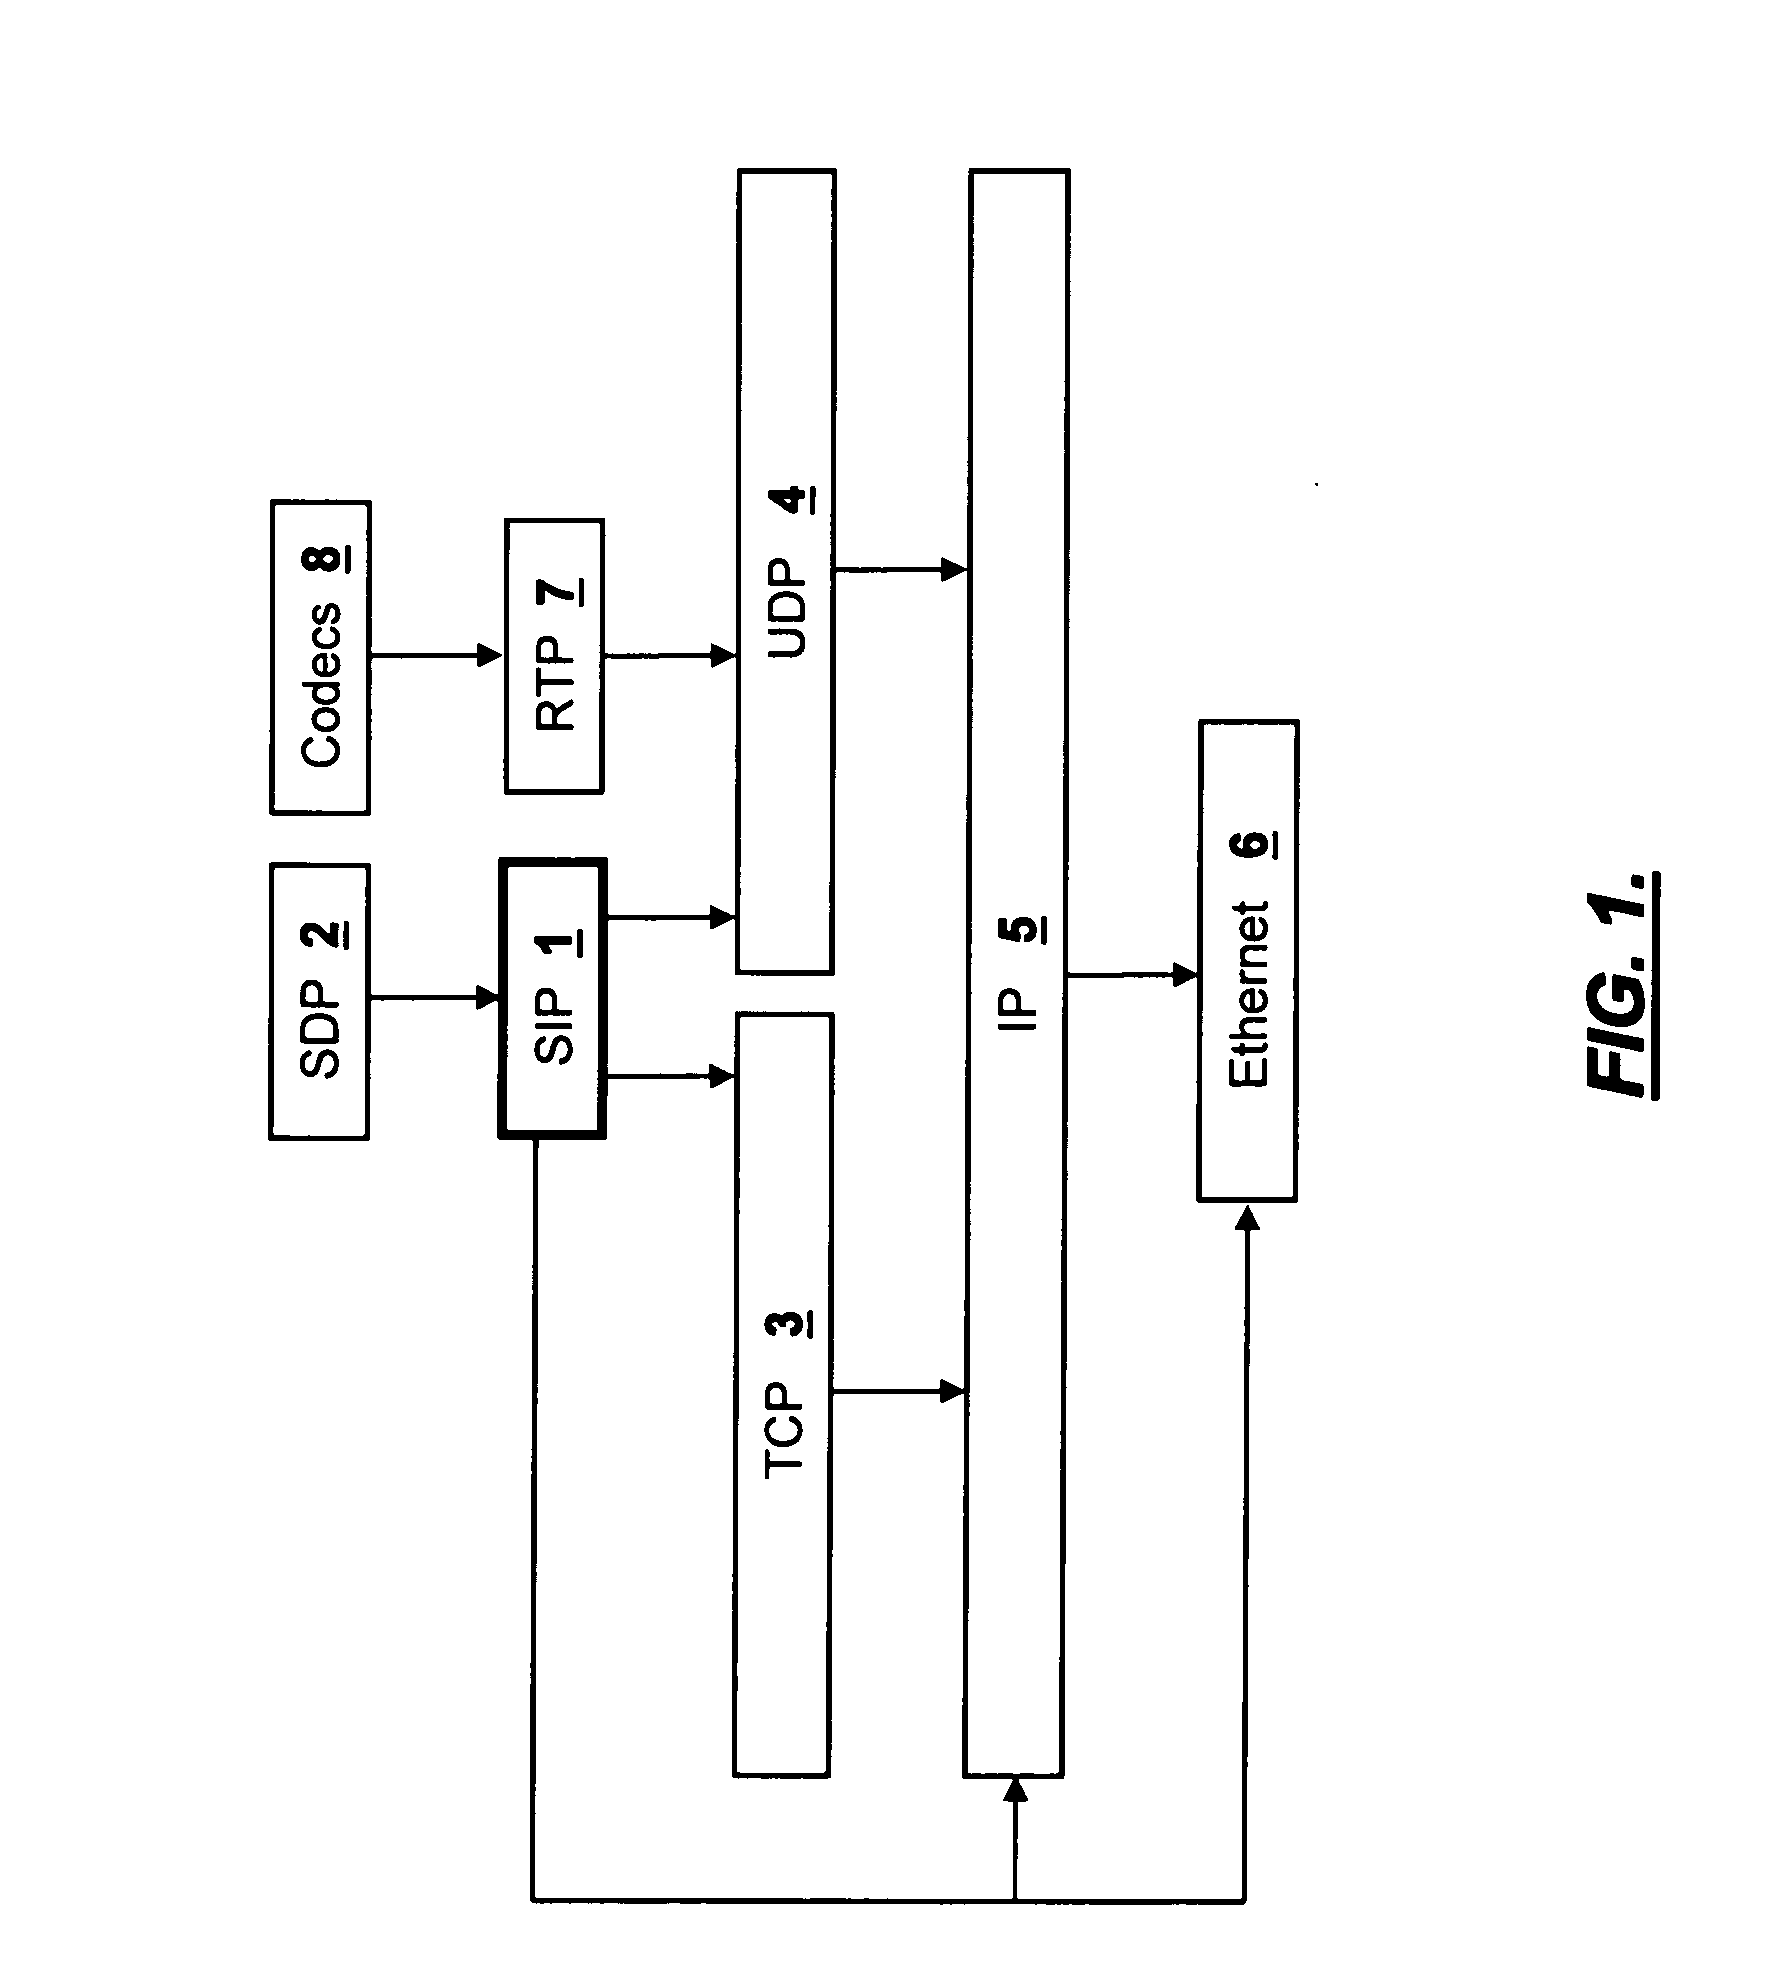 Methods and systems for session initiation protocol control of network equipment